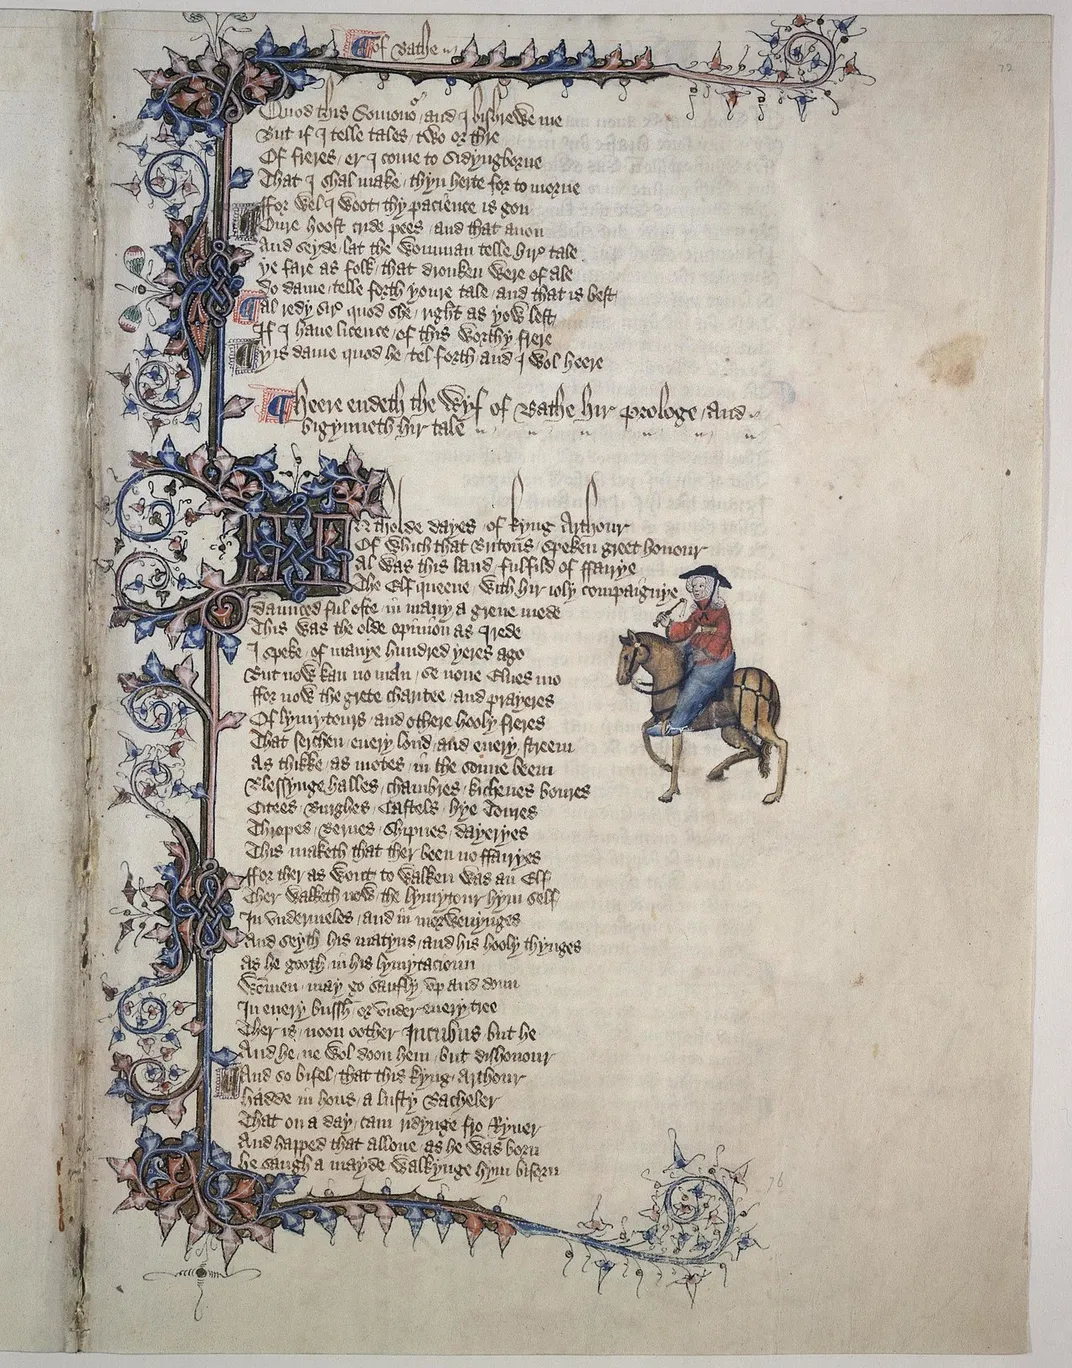 Prologue of "The Wife of Bath's Tale" from the Ellesmere Manuscript